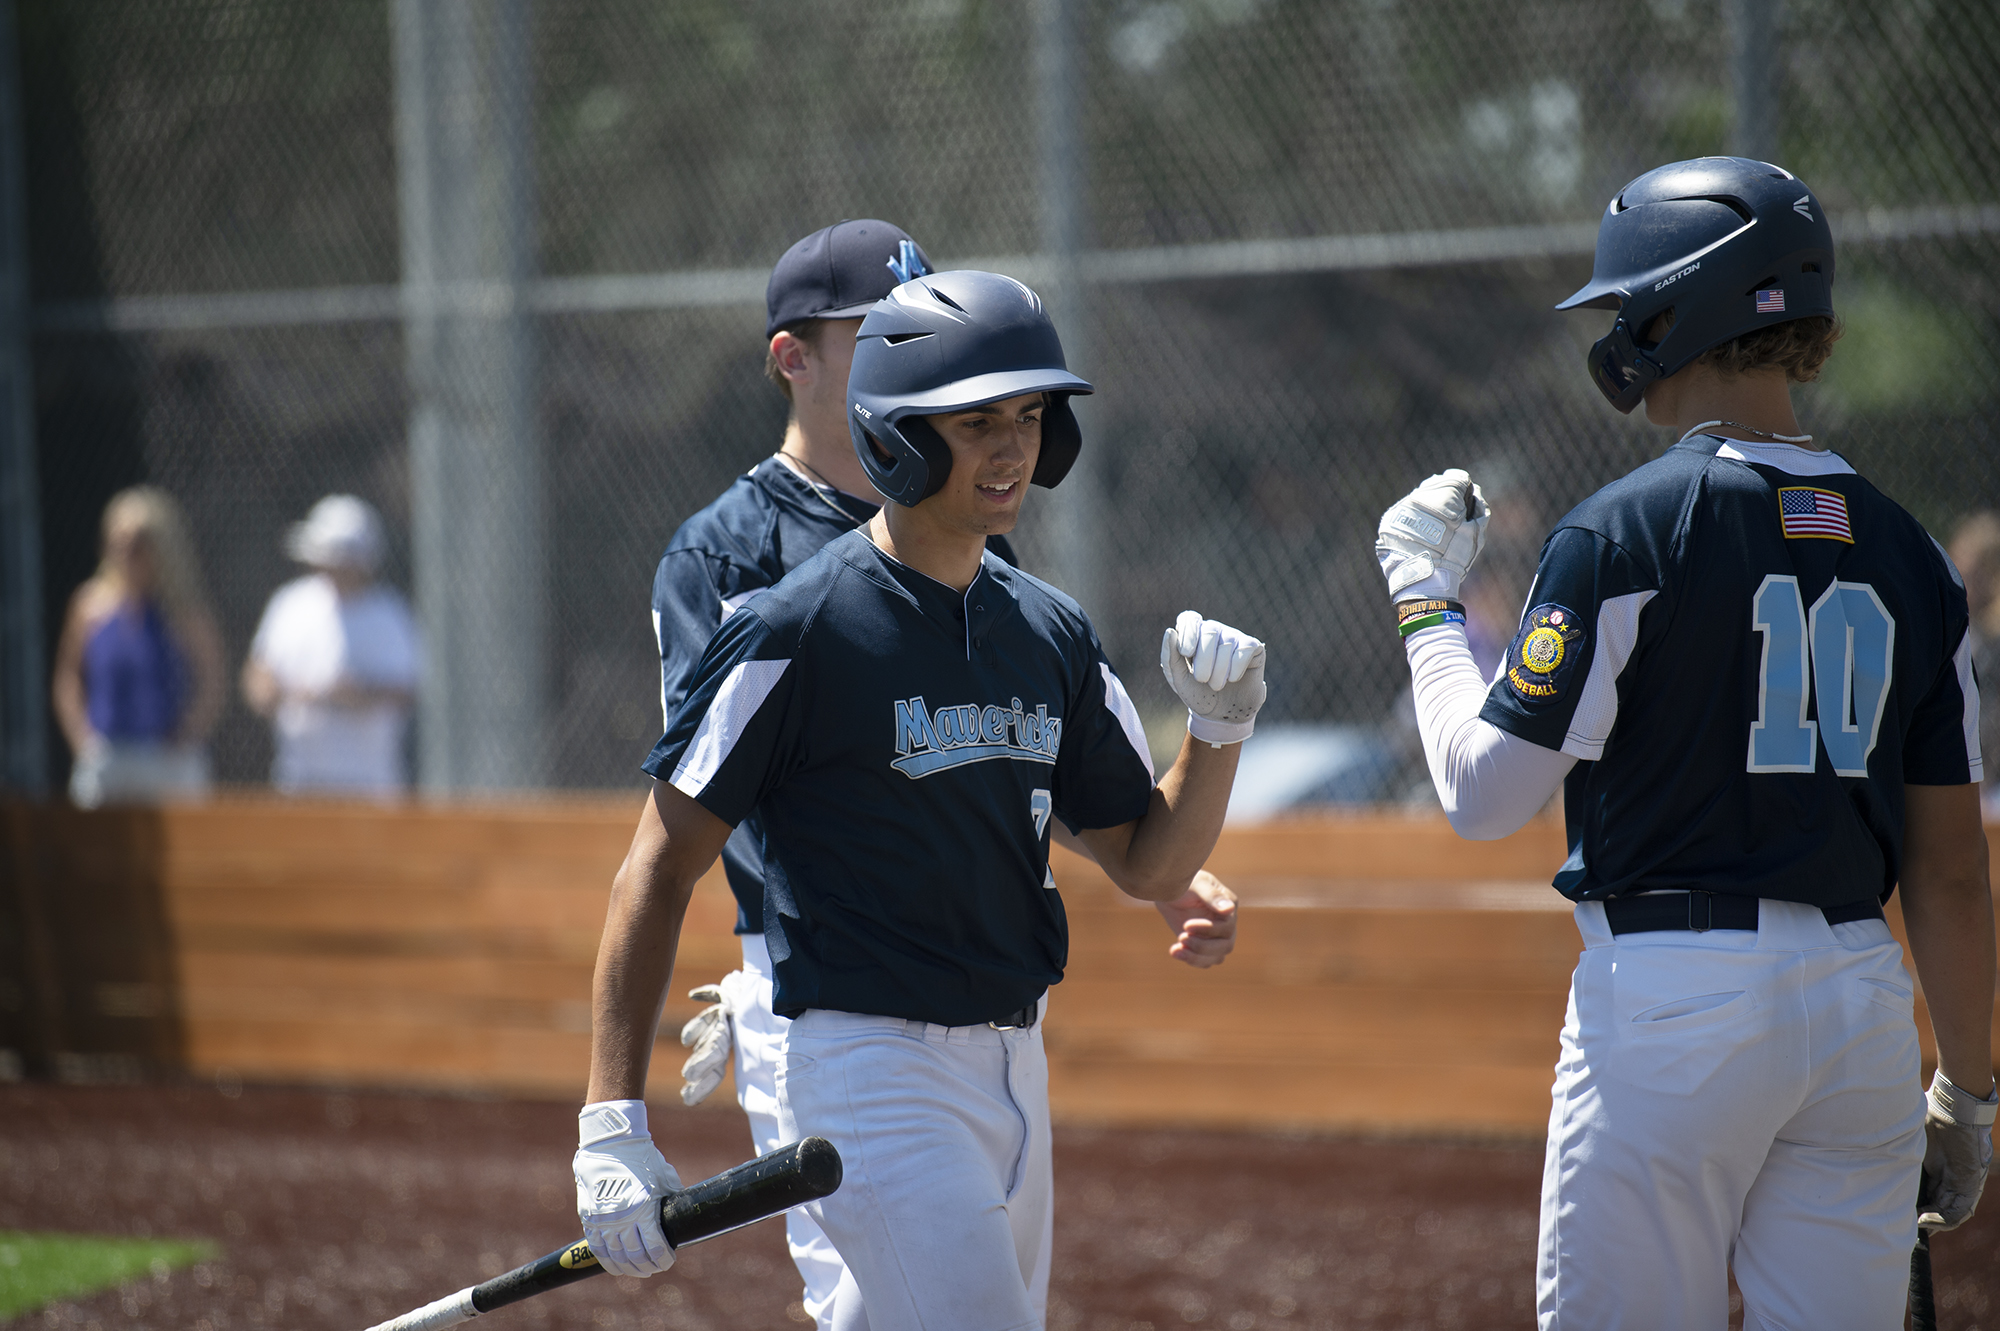 The Vancouver Mavericks' Zach Blair is greeted by Mitch Johnson after scoring in the Mavericks' 3-2 loss to the Portland Baseball Club in the opening game of the Curt Daniels Invitational on Wednesday, June 29, 2022 at Union High School (Tim Martinez/The Columbian)